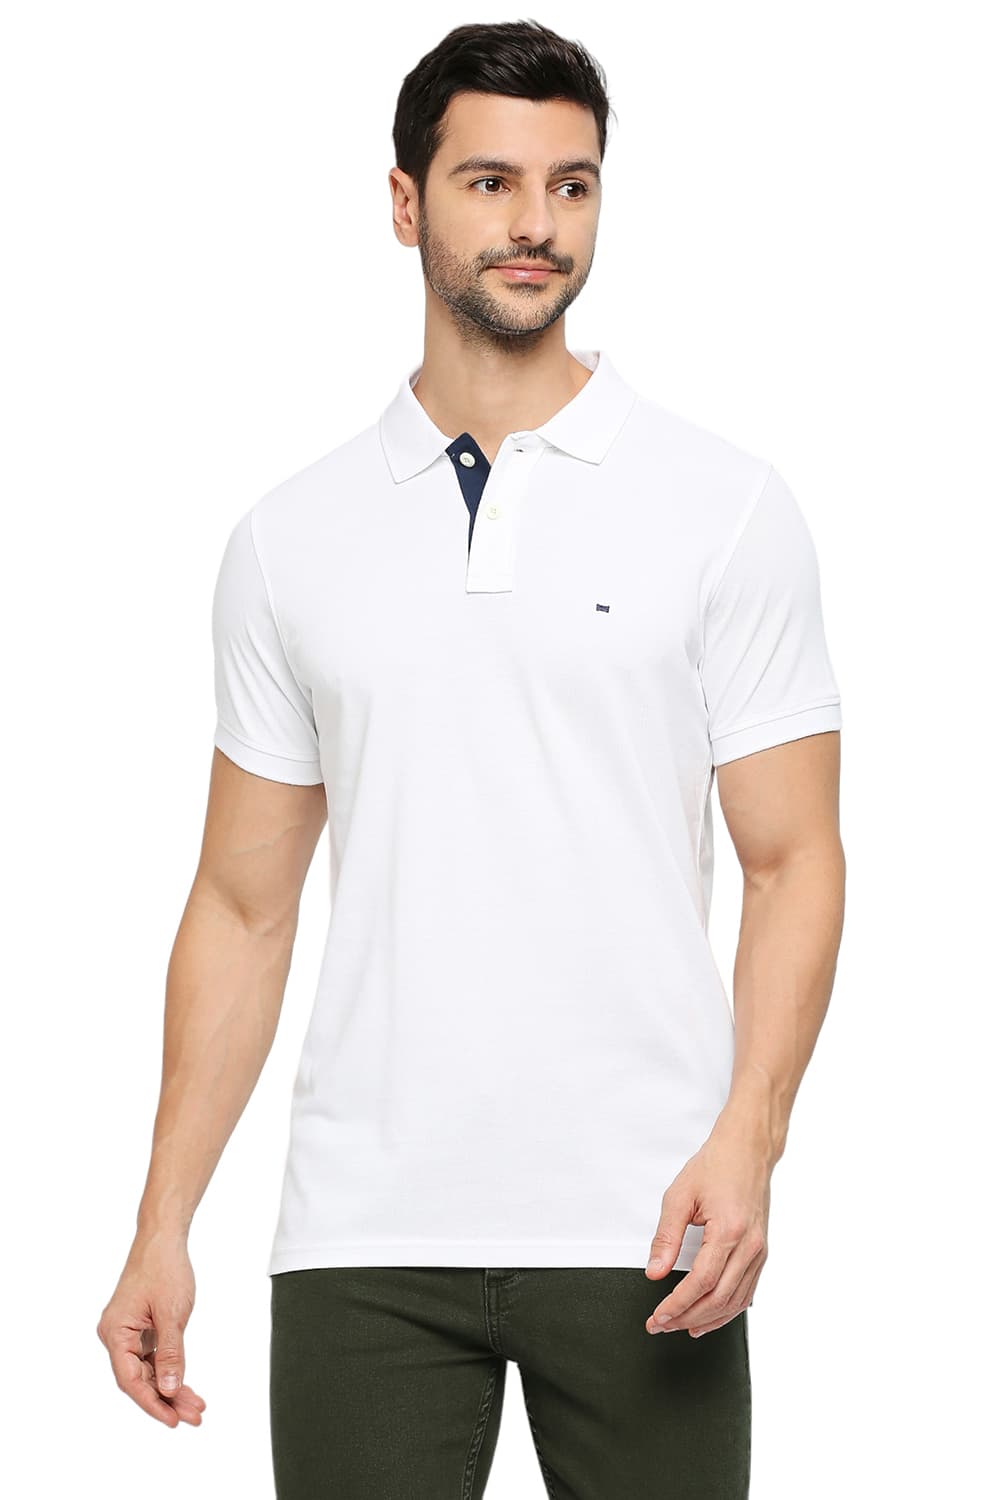 BASICS MUSCLE FIT COTTON SOLID POLO T-SHIRTS